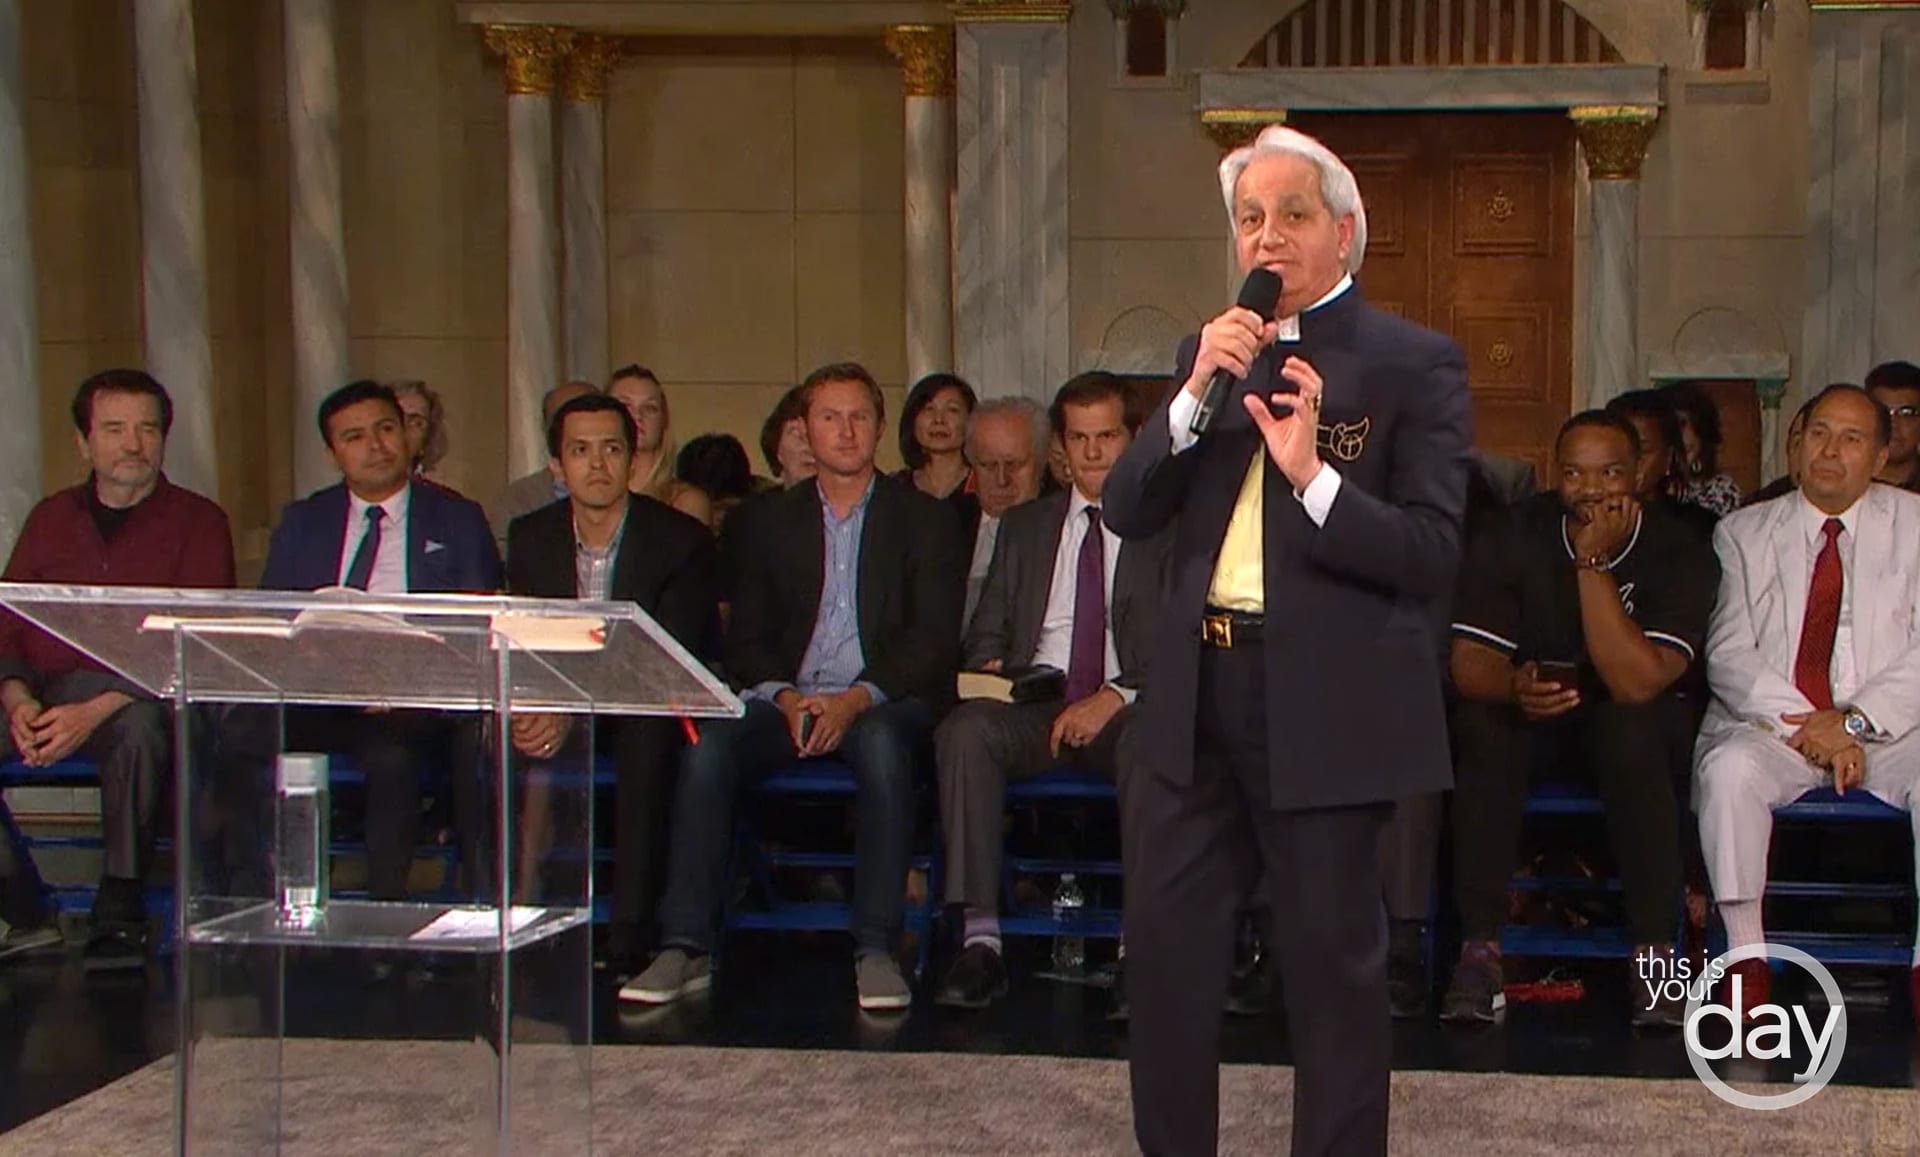 Healing In Atonement - This Is Your Day - Benny Hinn Ministries